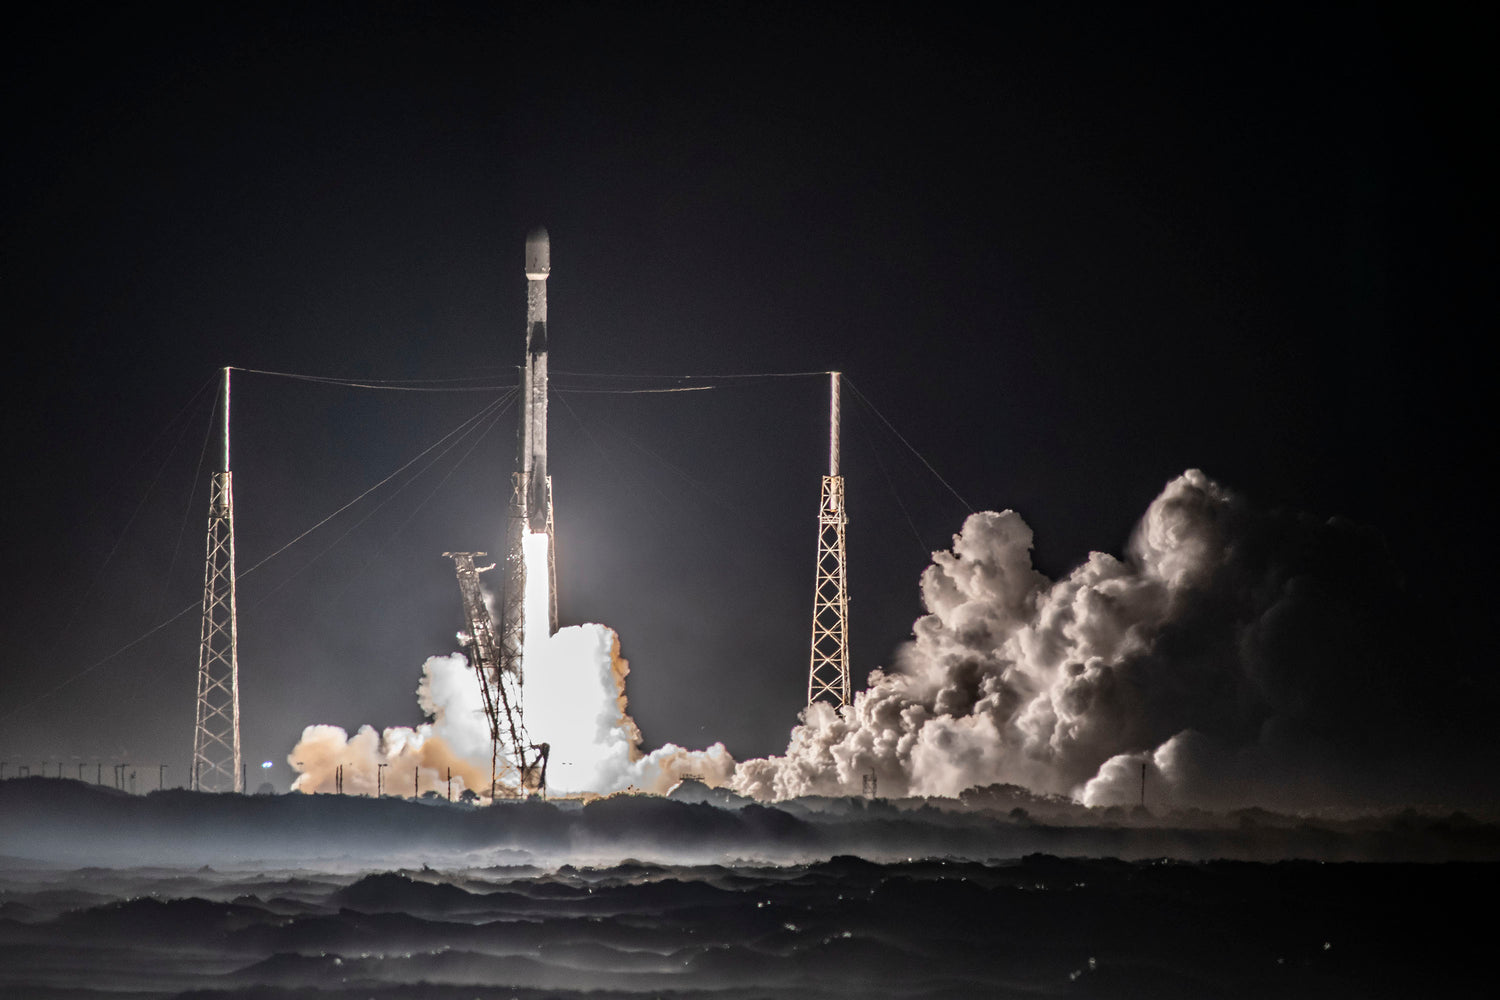 SpaceX flight-proven Falcon 9 launches 54 Starlink satellites to orbit from Florida’s Coast after multiple weather delays